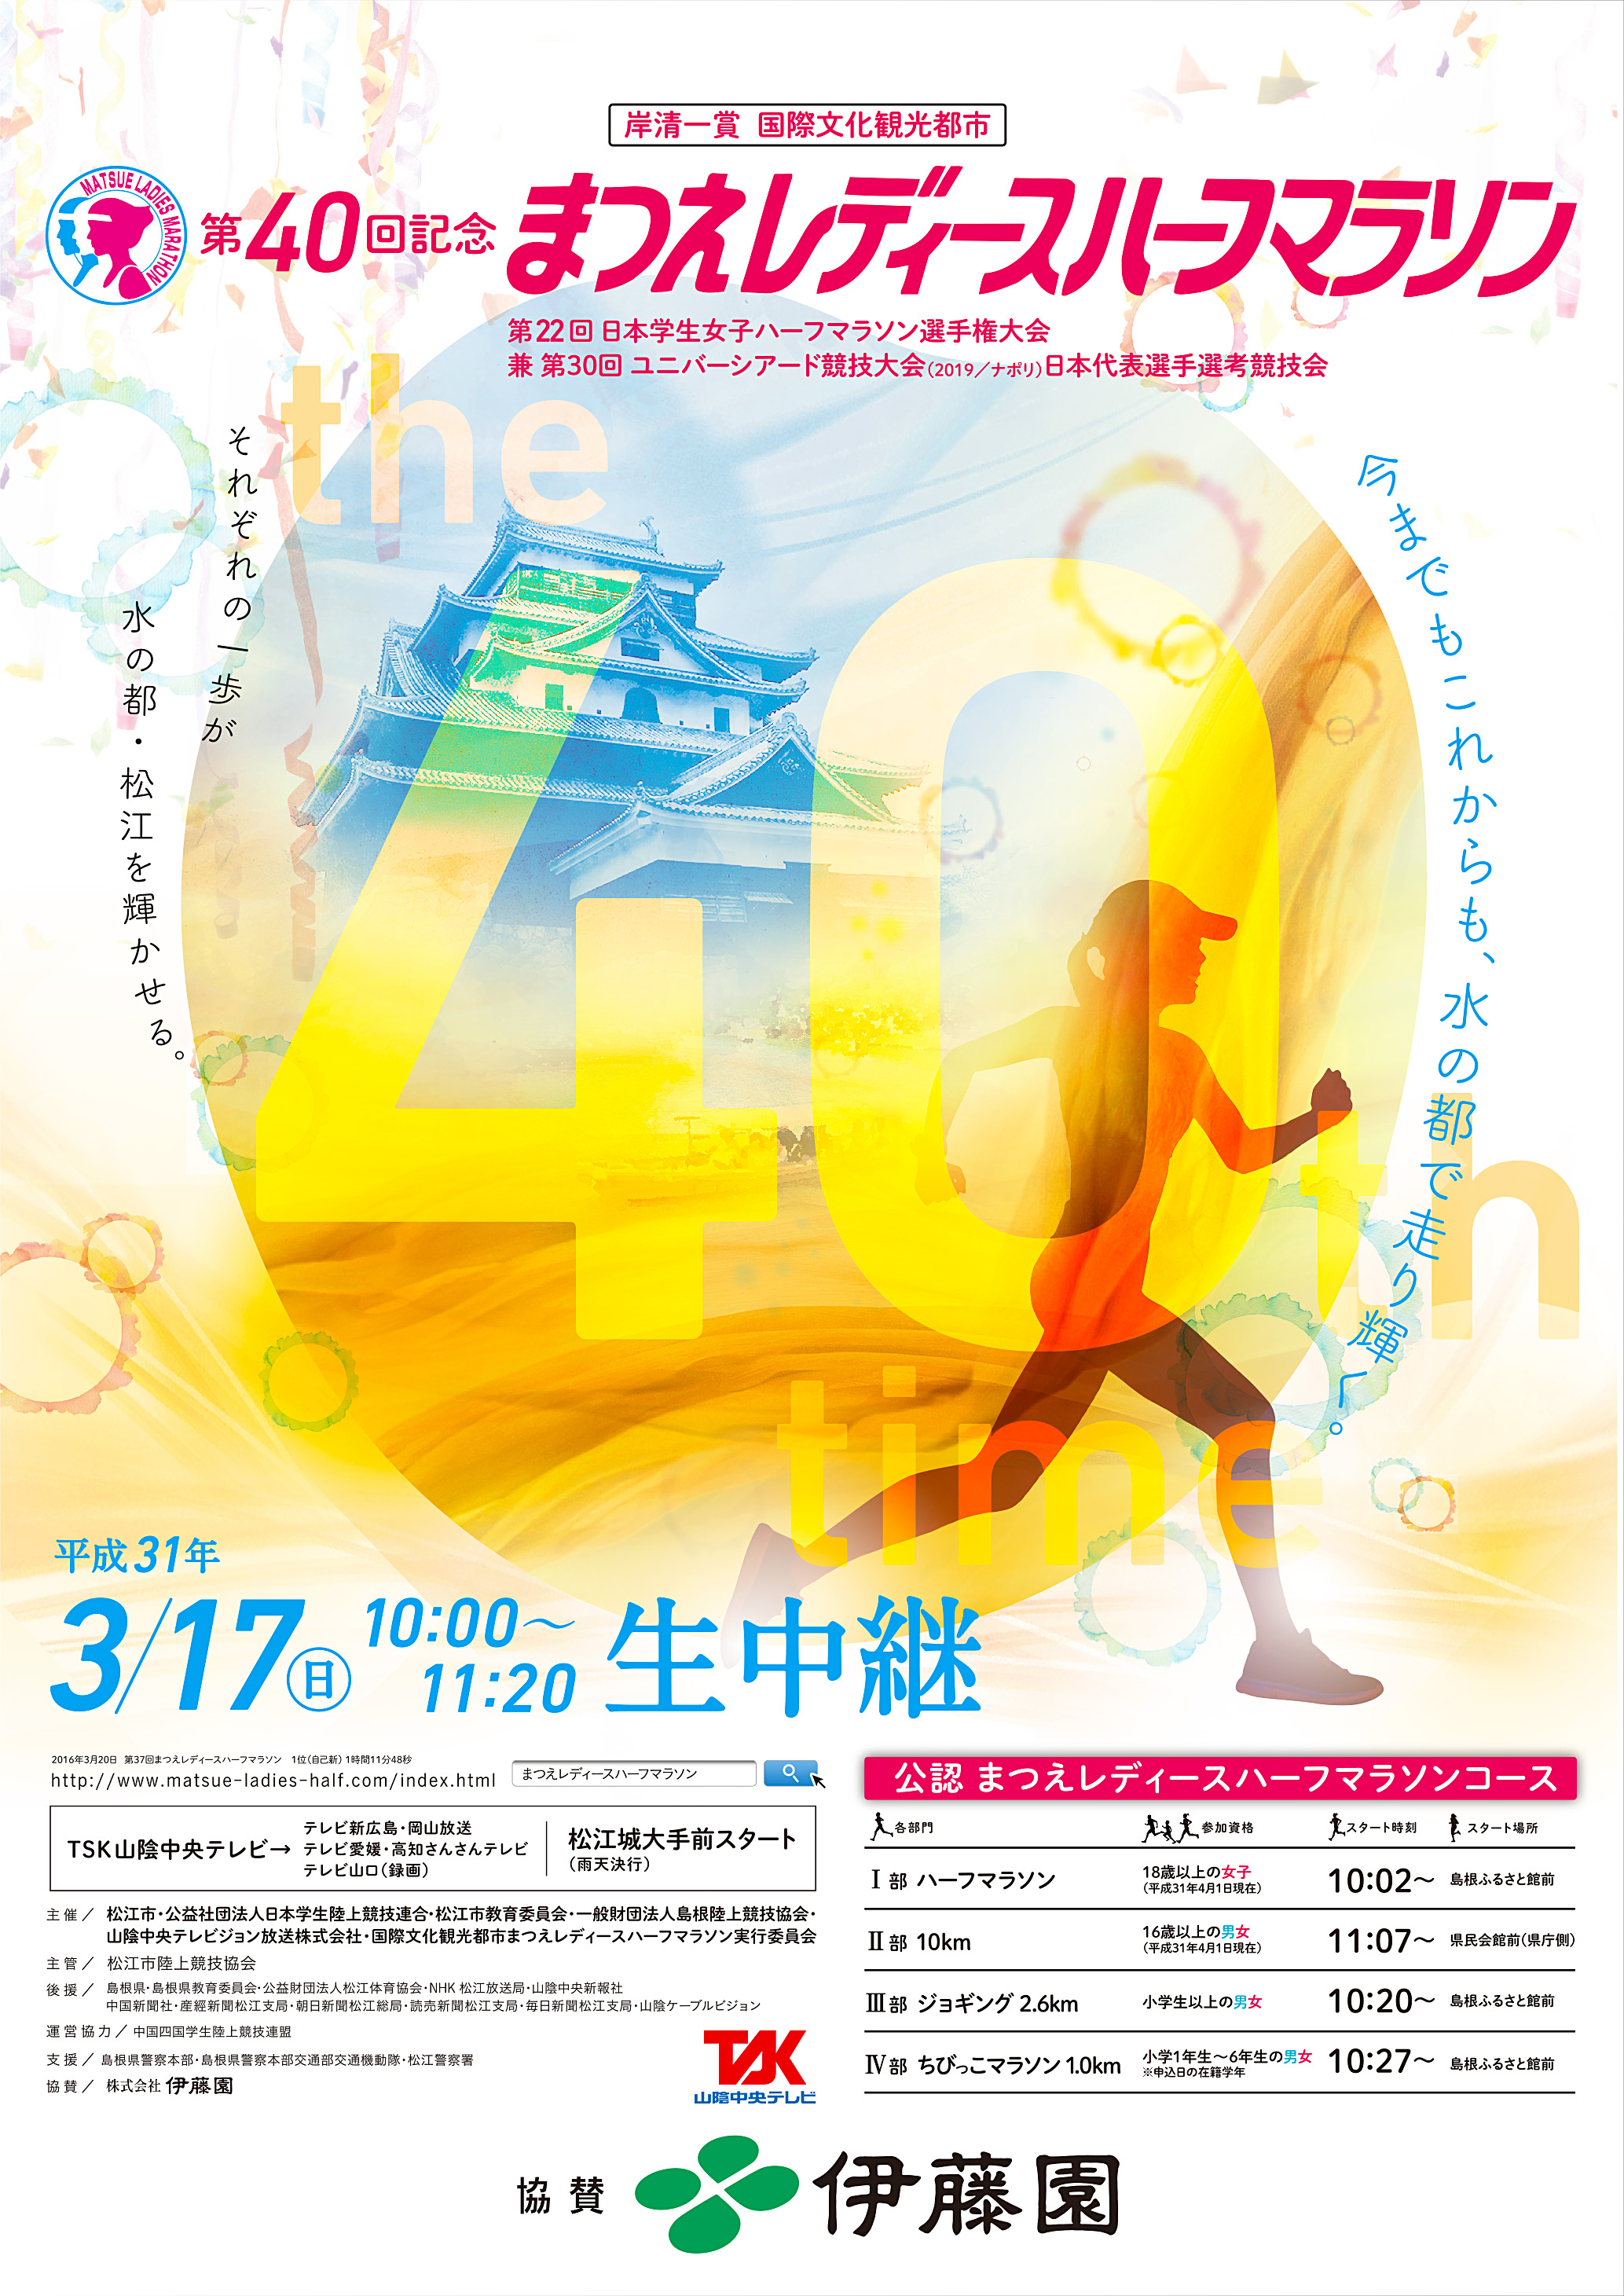 2016poster